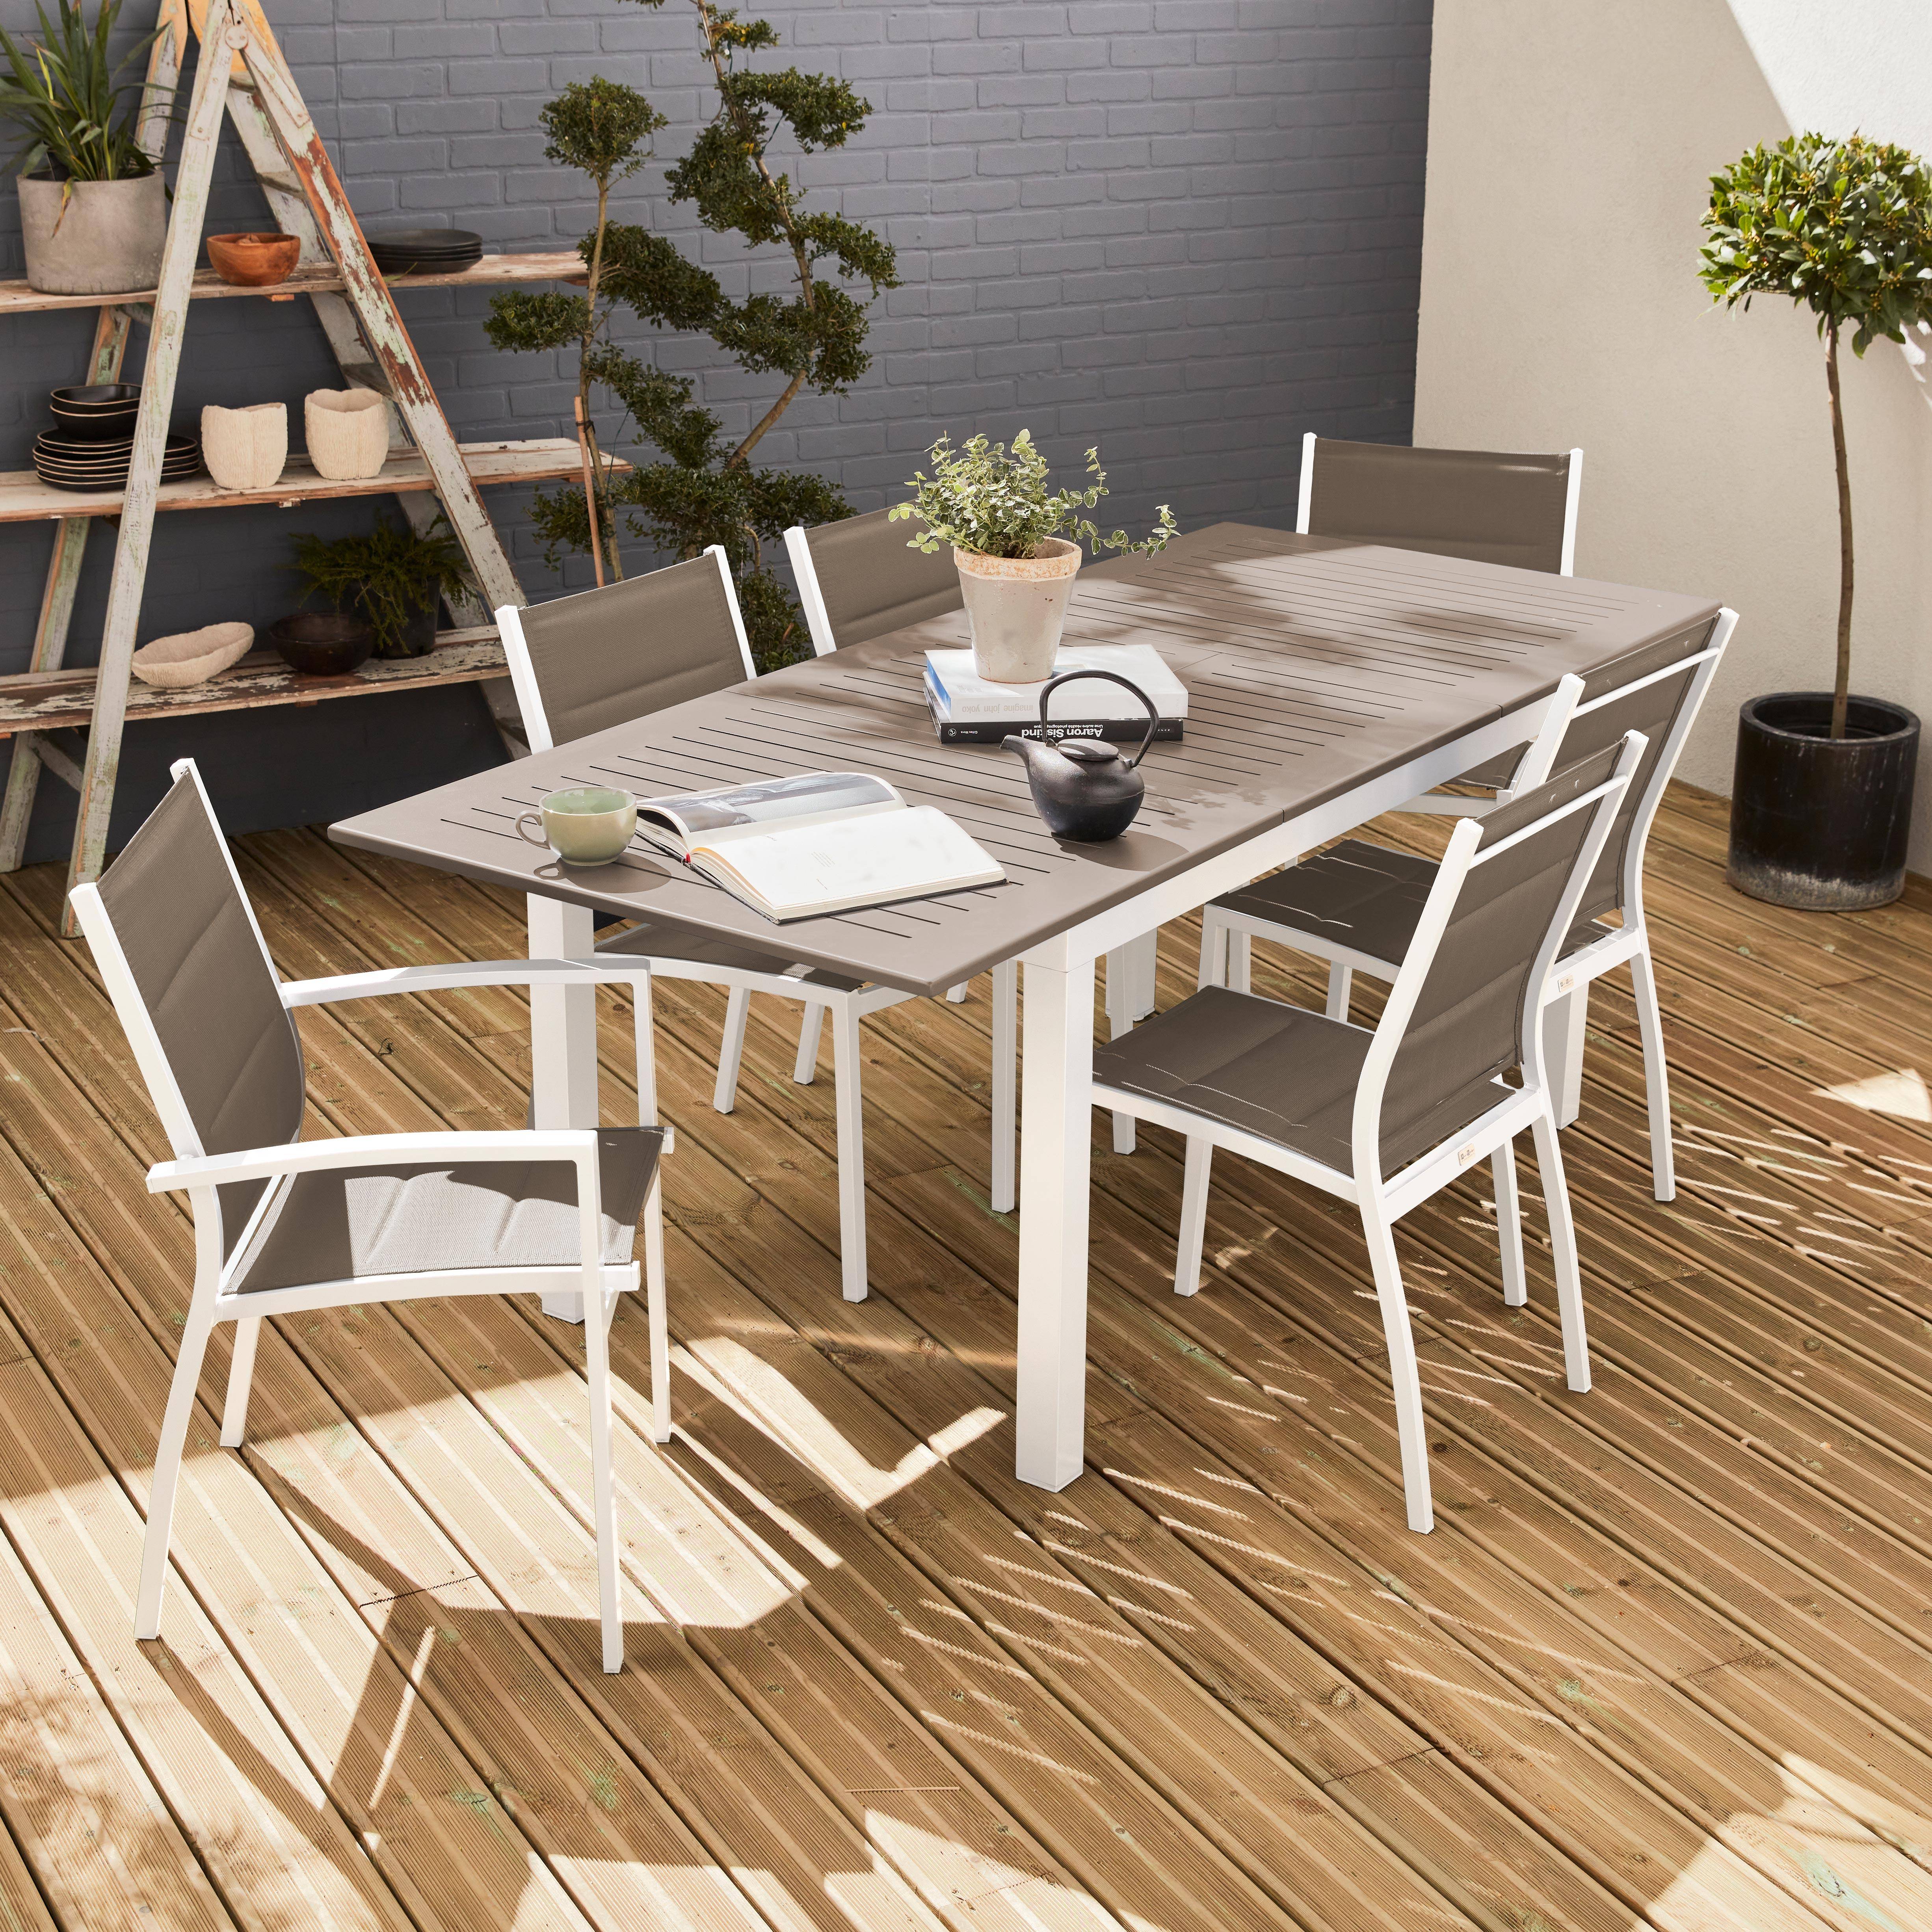 6-seater garden dining set, extendable 150-210cm aluminium table, 4 chairs and 2 armchairs - Chicago 6 - White frame, Beige-Brown textilene,sweeek,Photo1